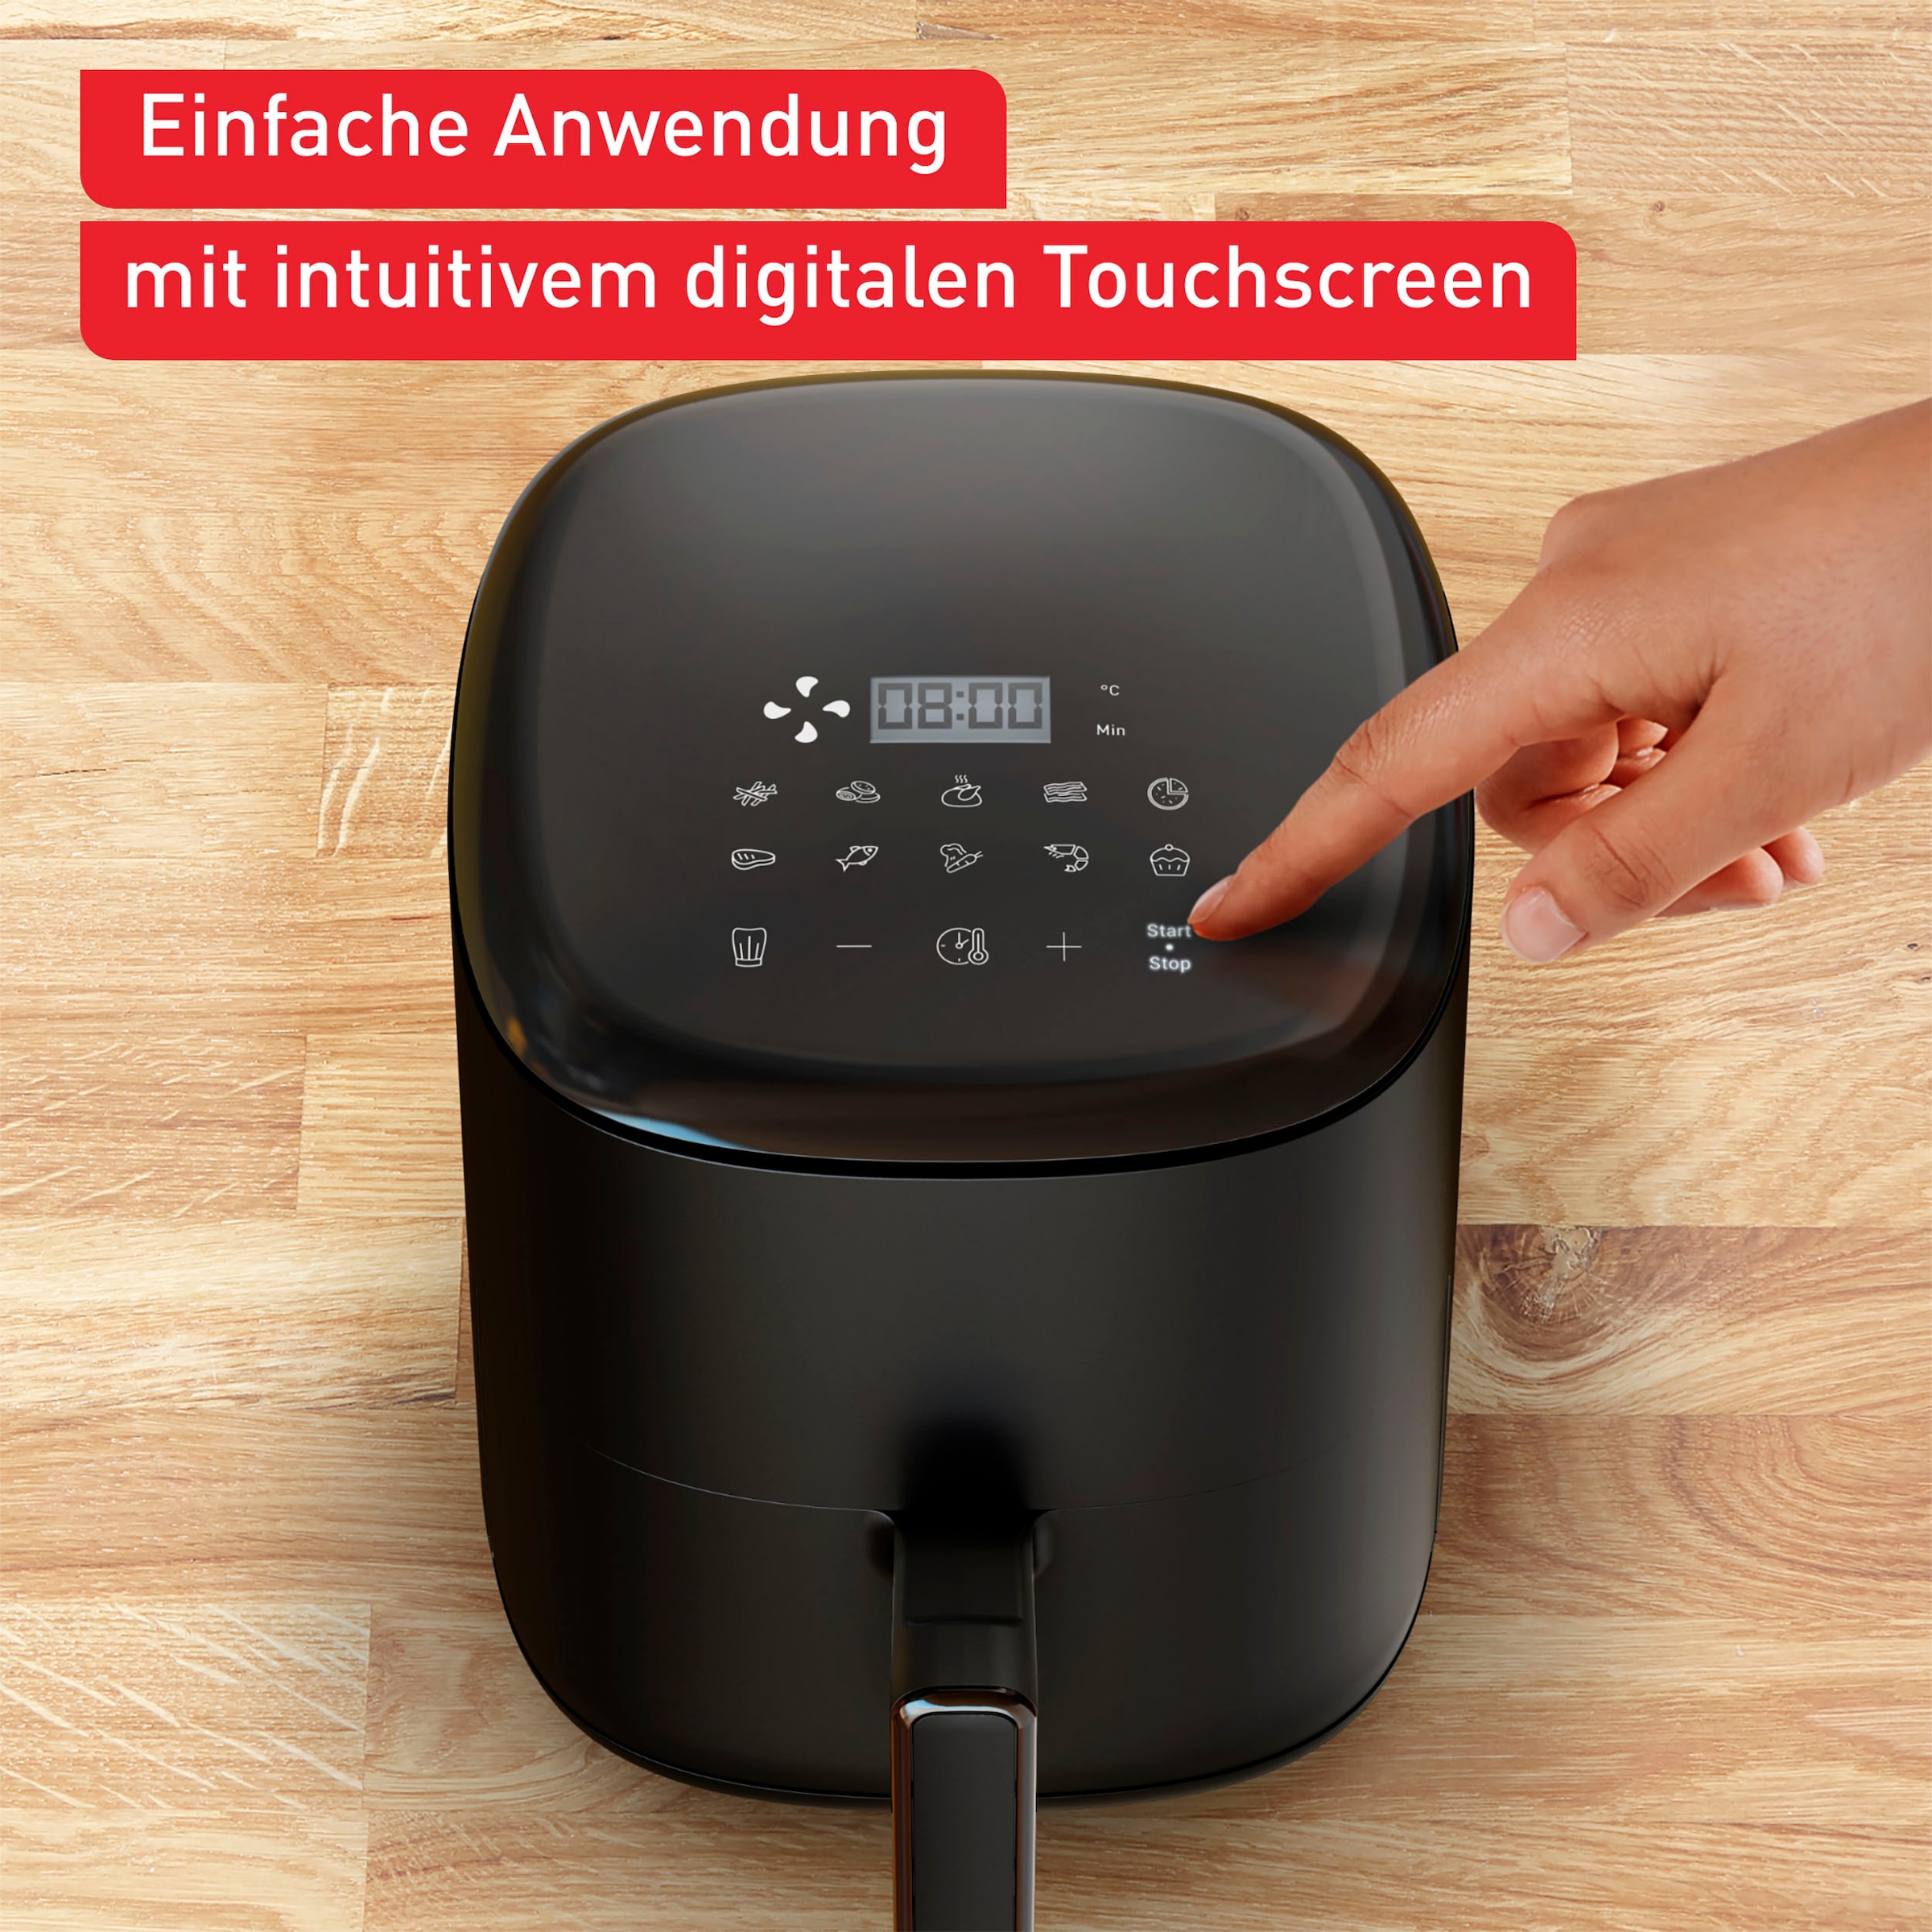 OTTO im Online Compact«, Heißluftfritteuse W Fry Easy Shop Tefal 1300 »EY1458